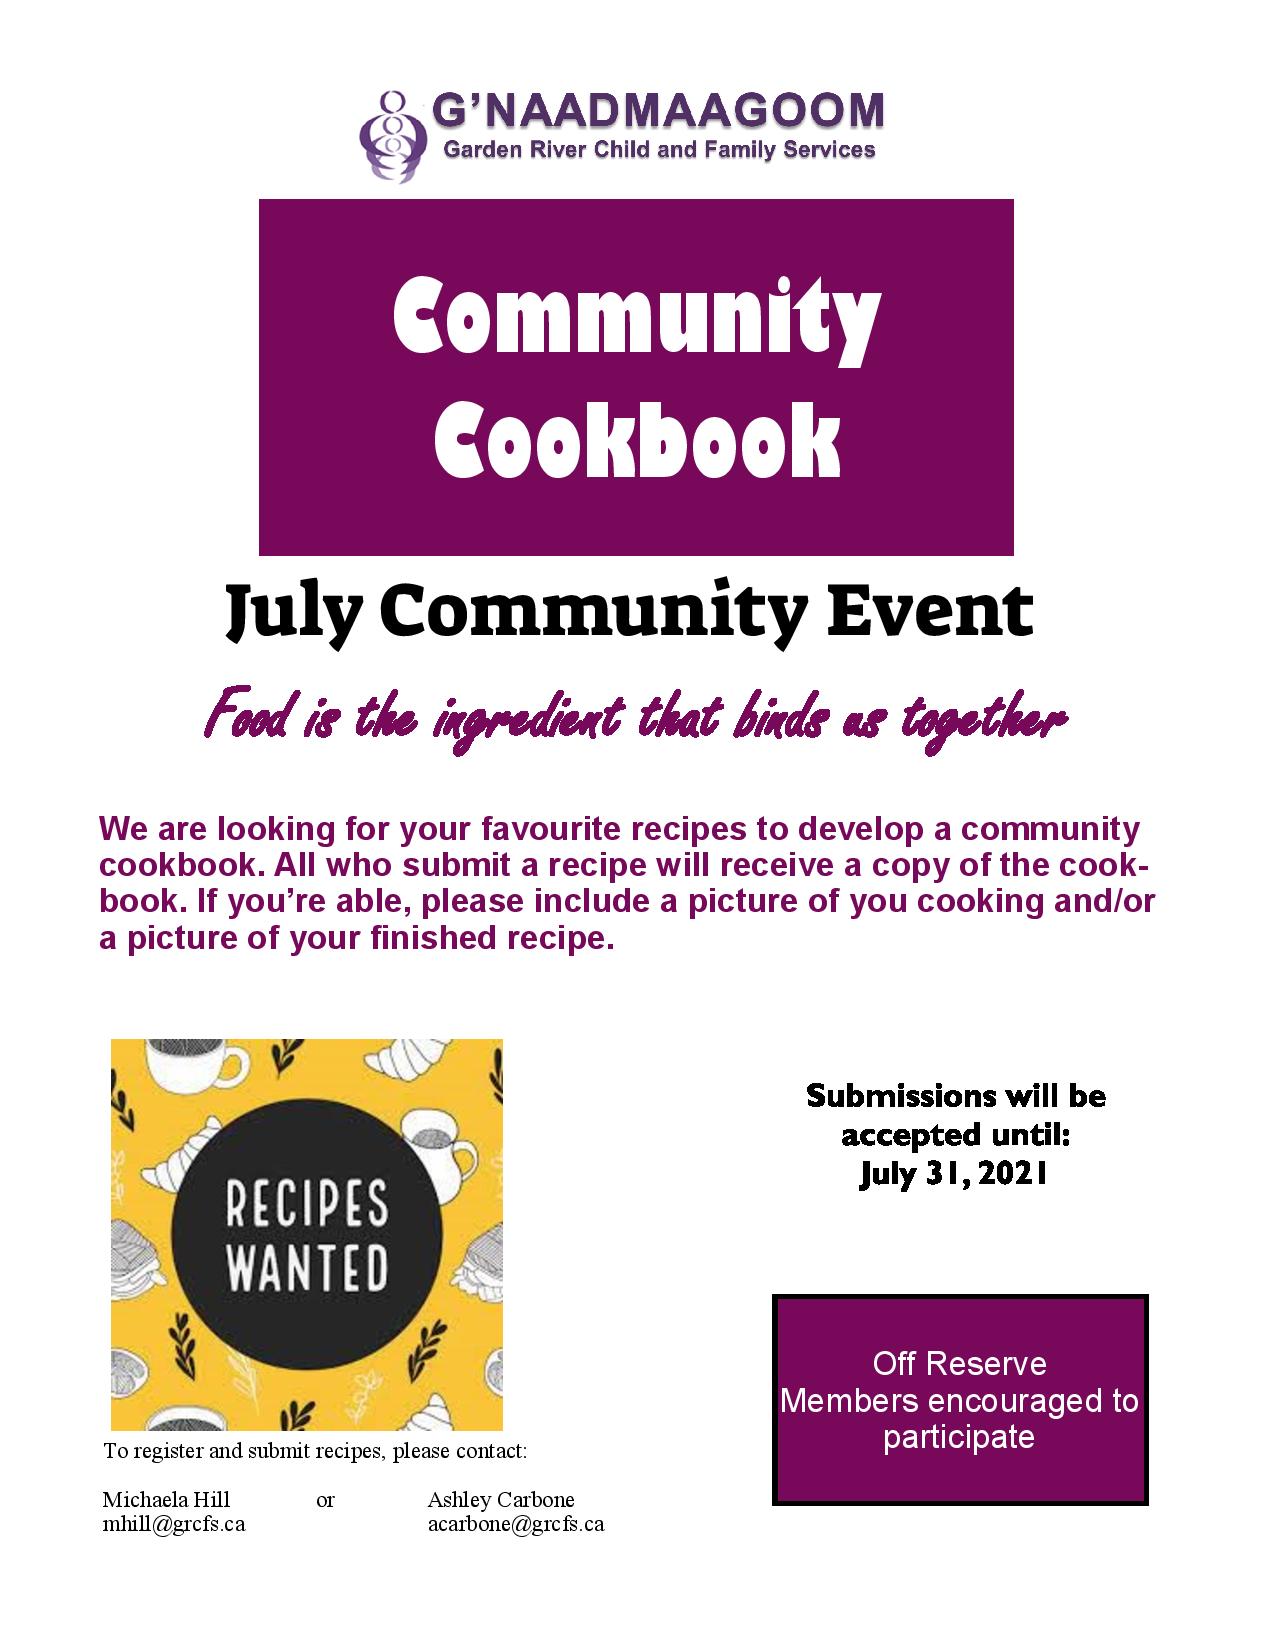 Garden River First Nation Child & Family Services July Community Event: Community Cookbook